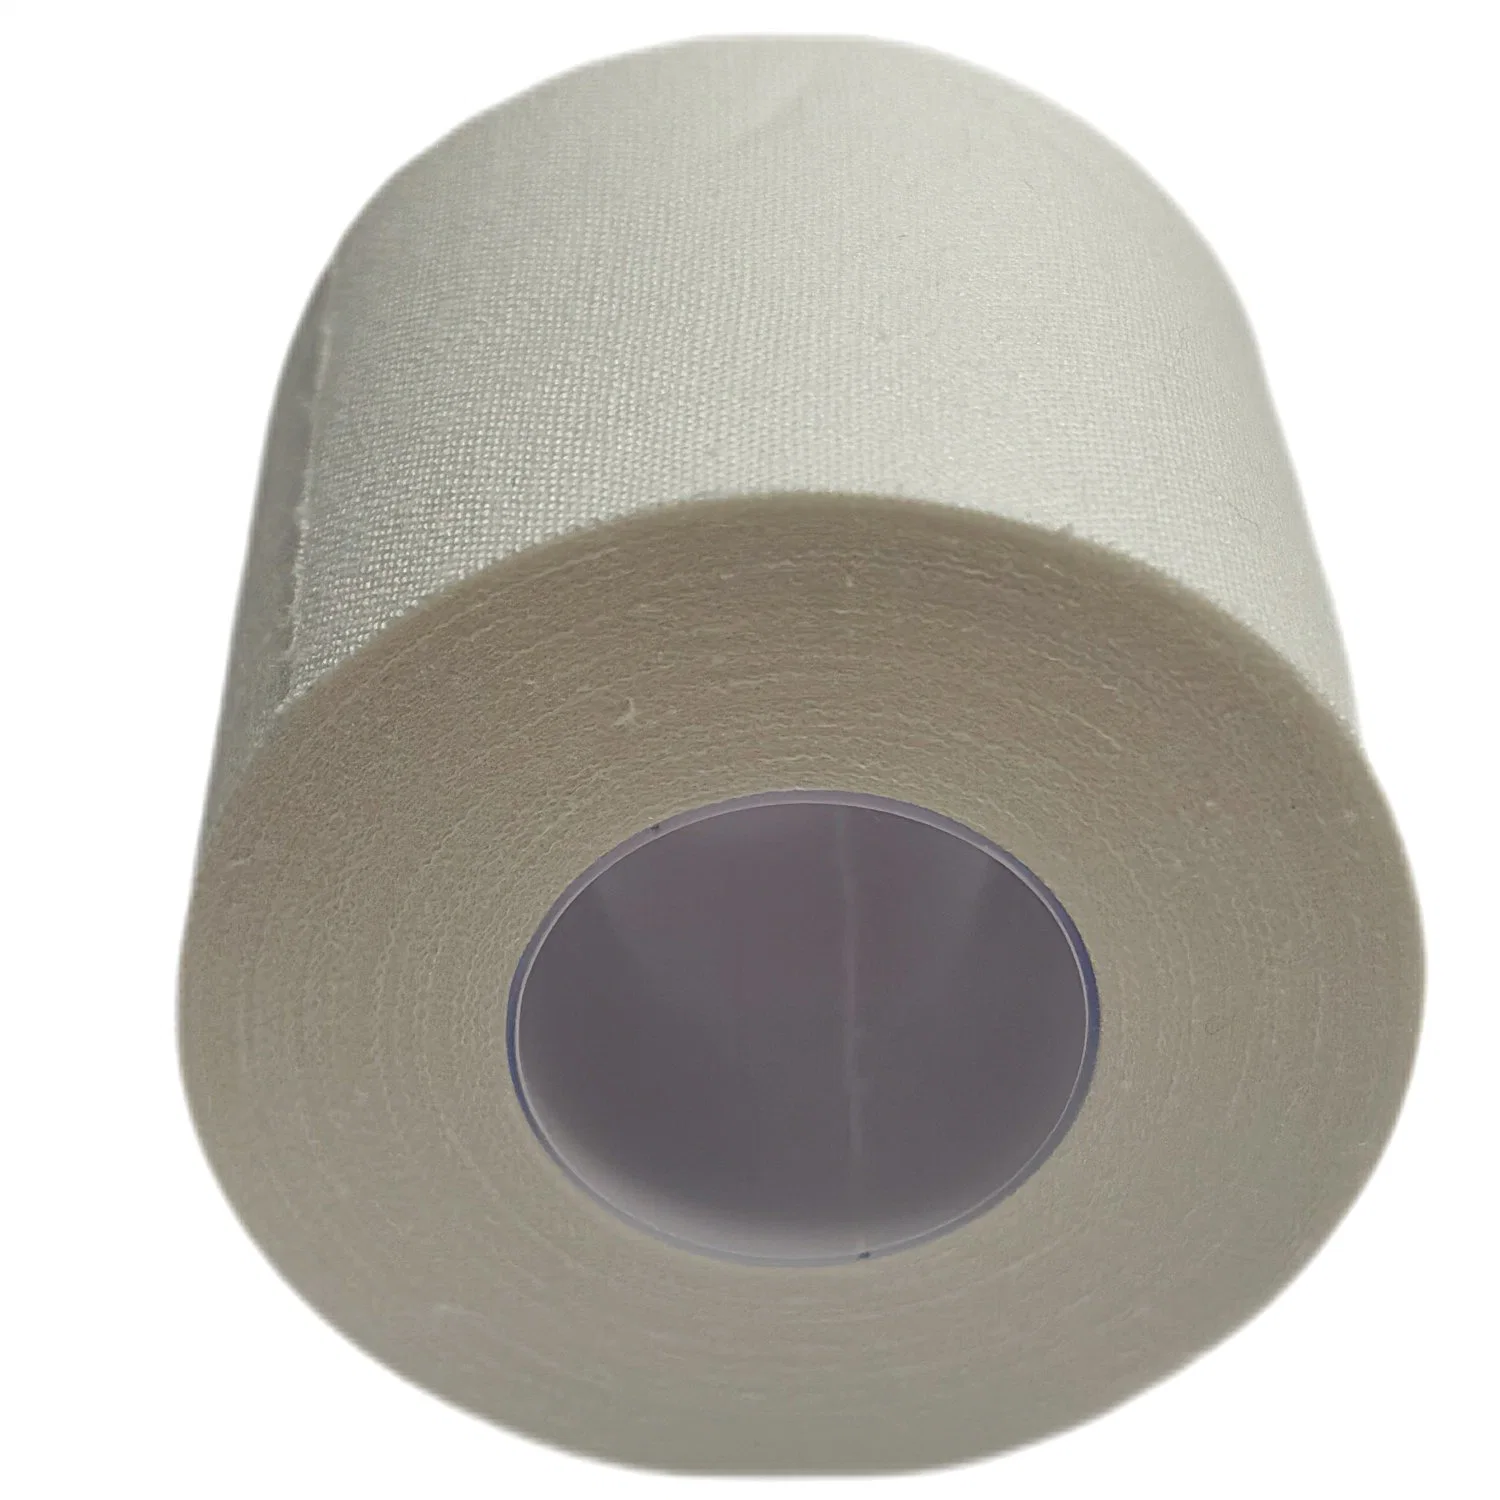 White Cotton Fabric Sports Protective Wrap Gymnastic Tape